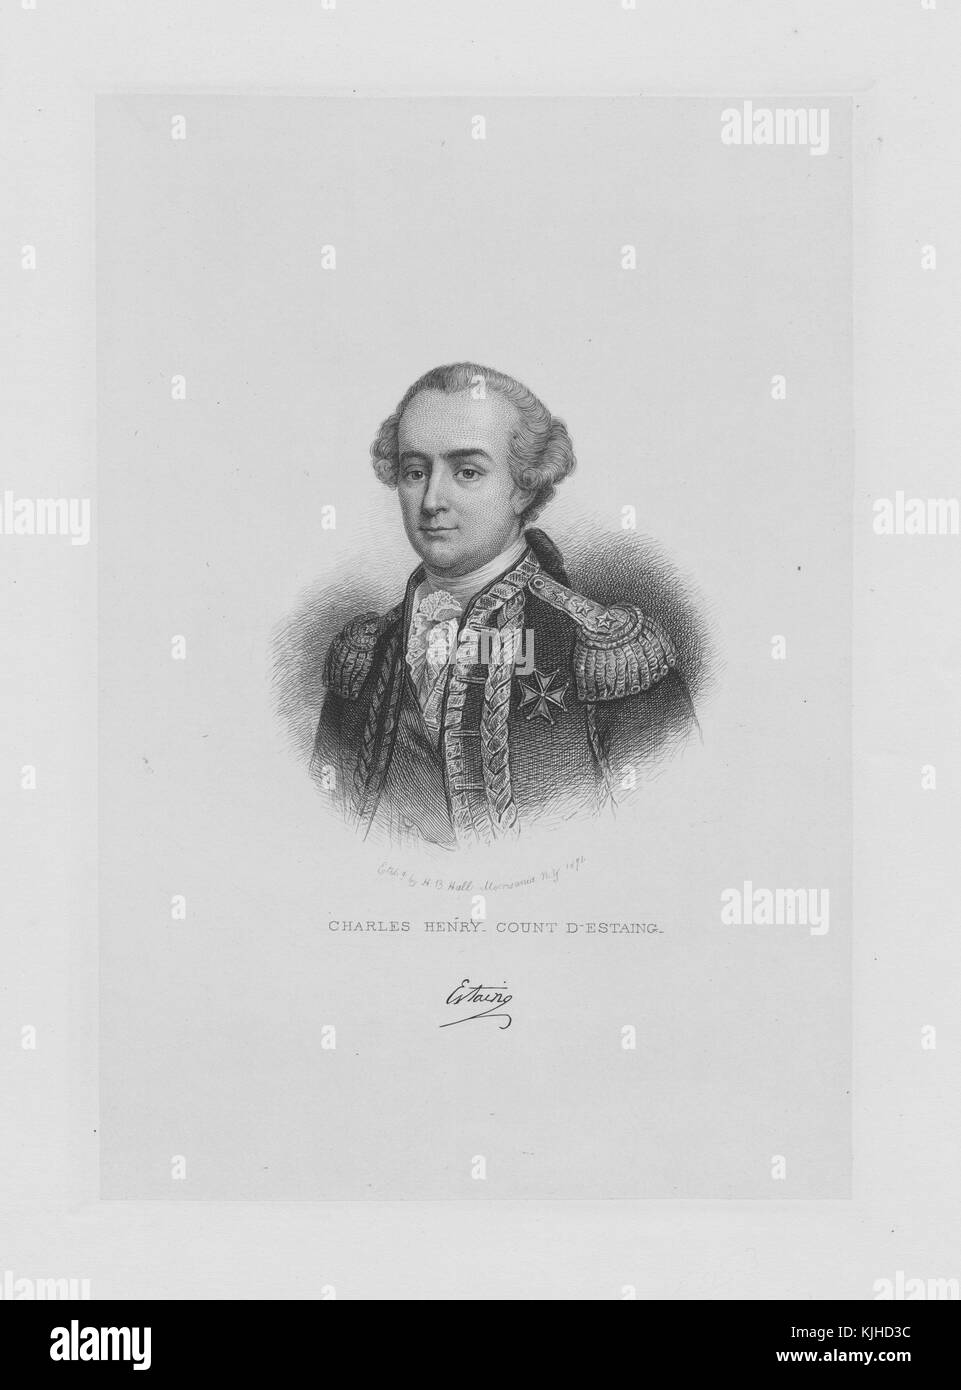 Engraved portrait of Charles Henri Hector, comte d'Estaing, a French general and admiral, following France's entry into the American War of Independence in 1778, he led a fleet to aid the American rebels, he participated in a failed Franco-American siege of Newport, Rhode Island in 1778 and the equally unsuccessful 1779 Siege of Savannah before returning to France in 1780, his signature copied on the bottom, France, 1832. From the New York Public Library. Stock Photo